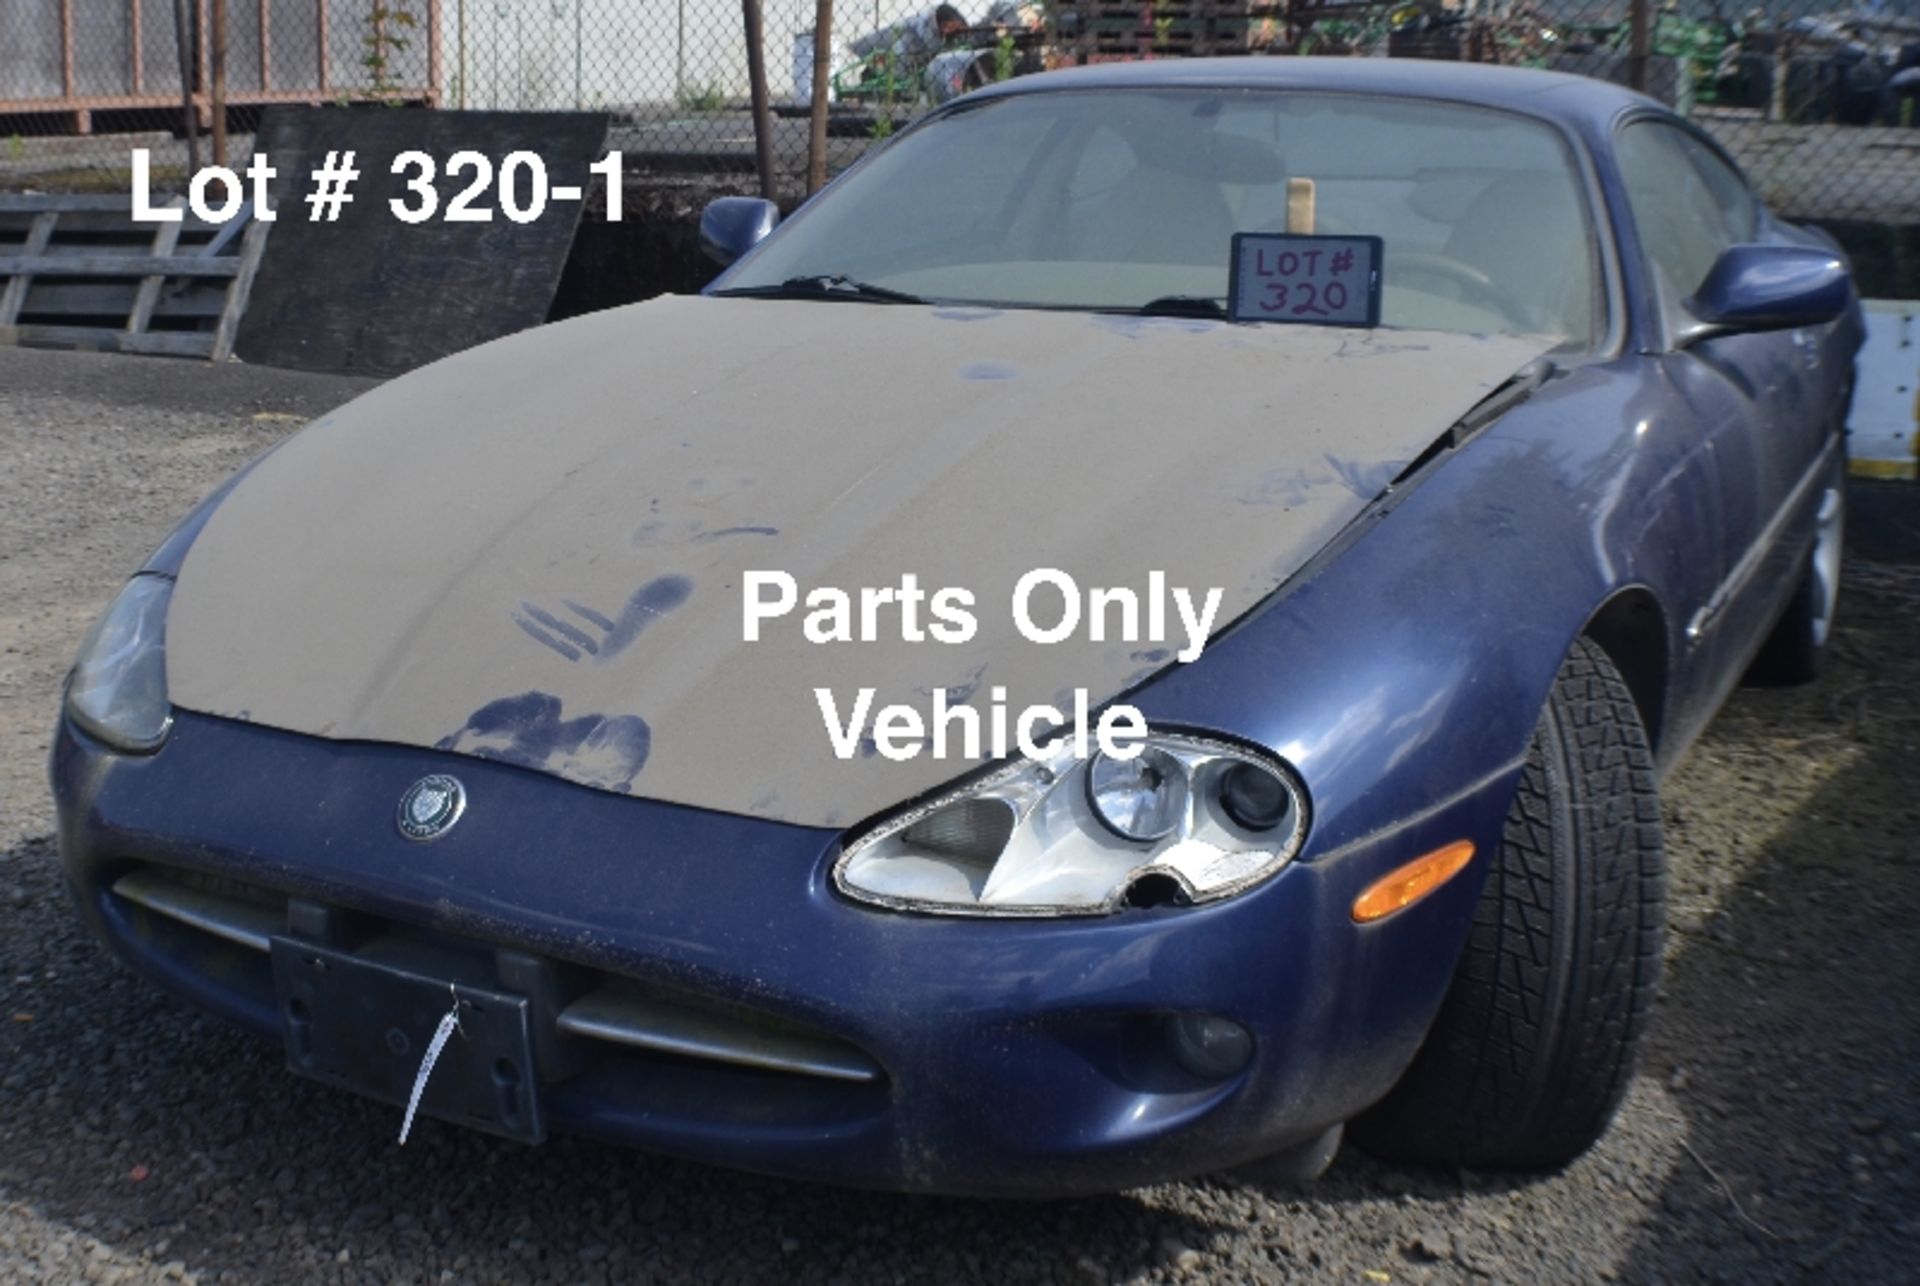 1997 XK8 Coupe parts only title paperwork. Buyer responsible for removal.